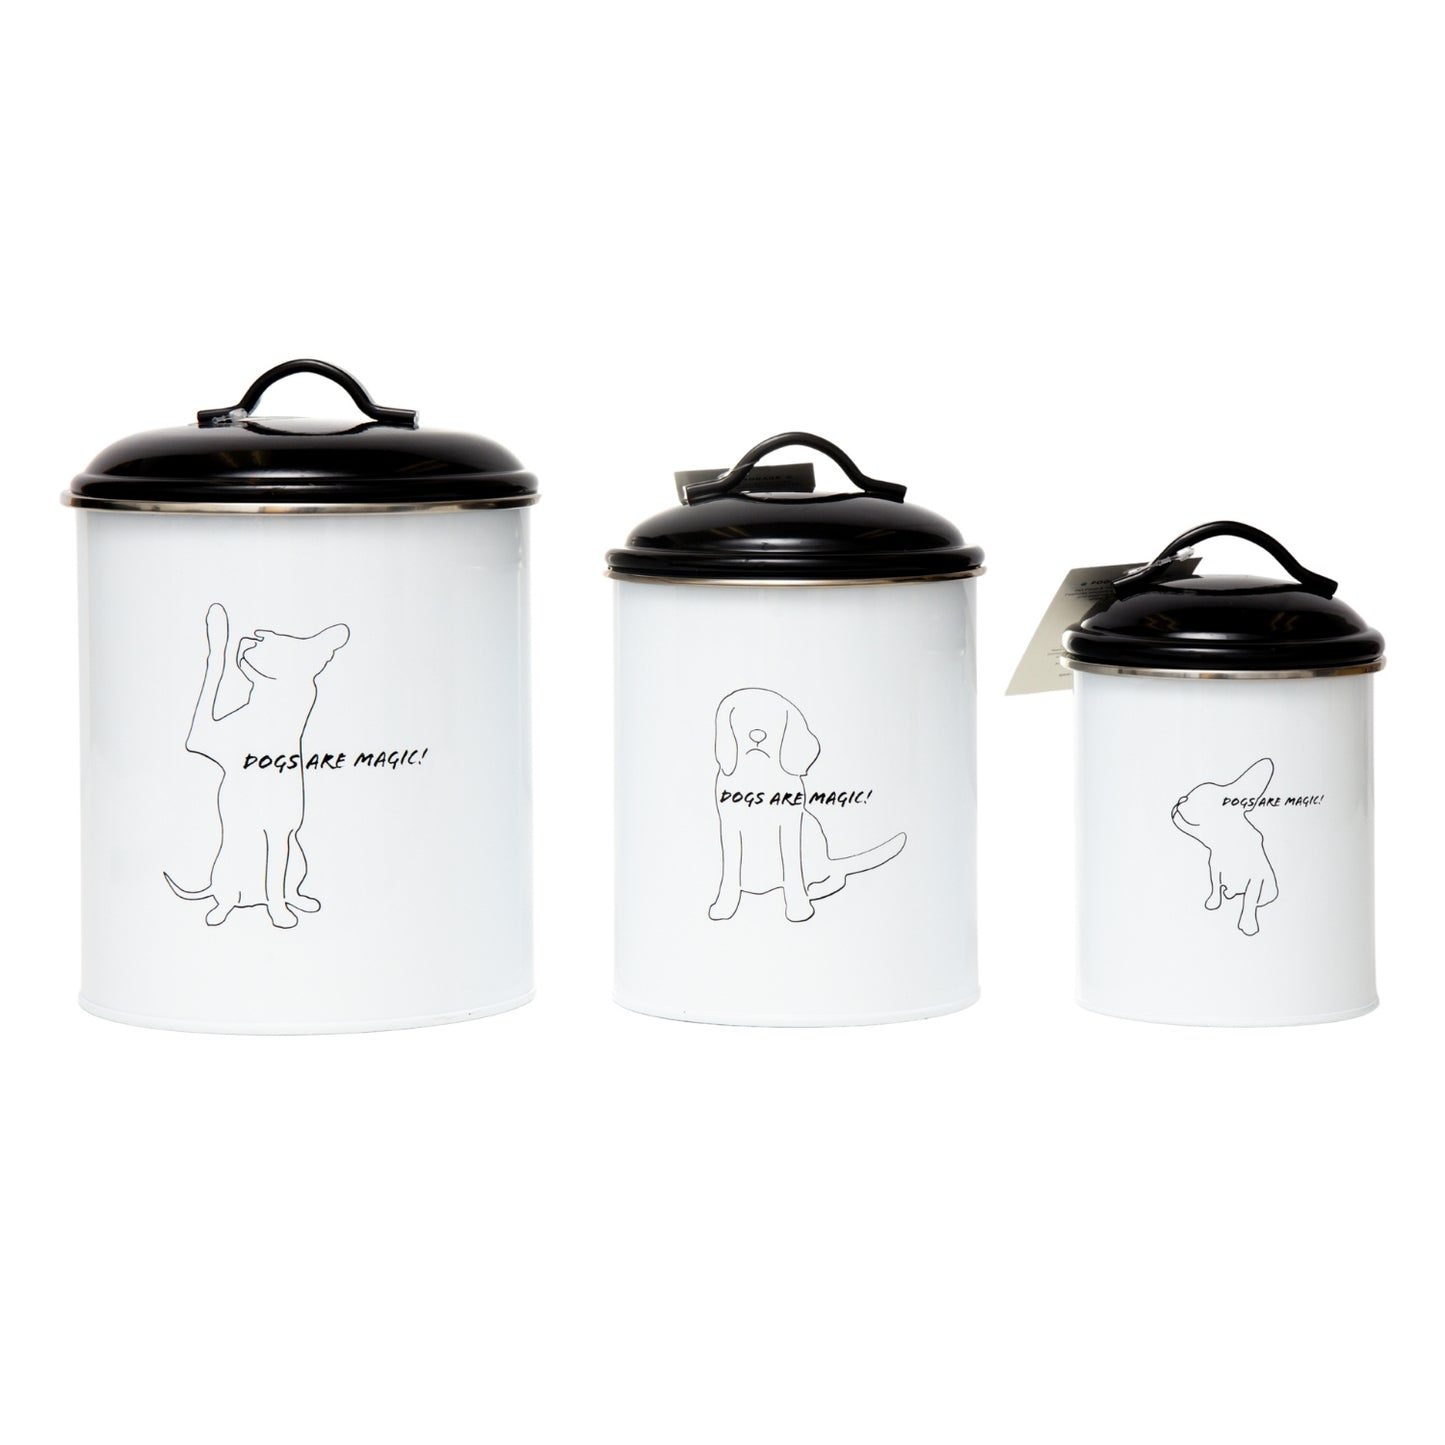 Country Living 3-Piece Black and White Pet Treat Storage Set